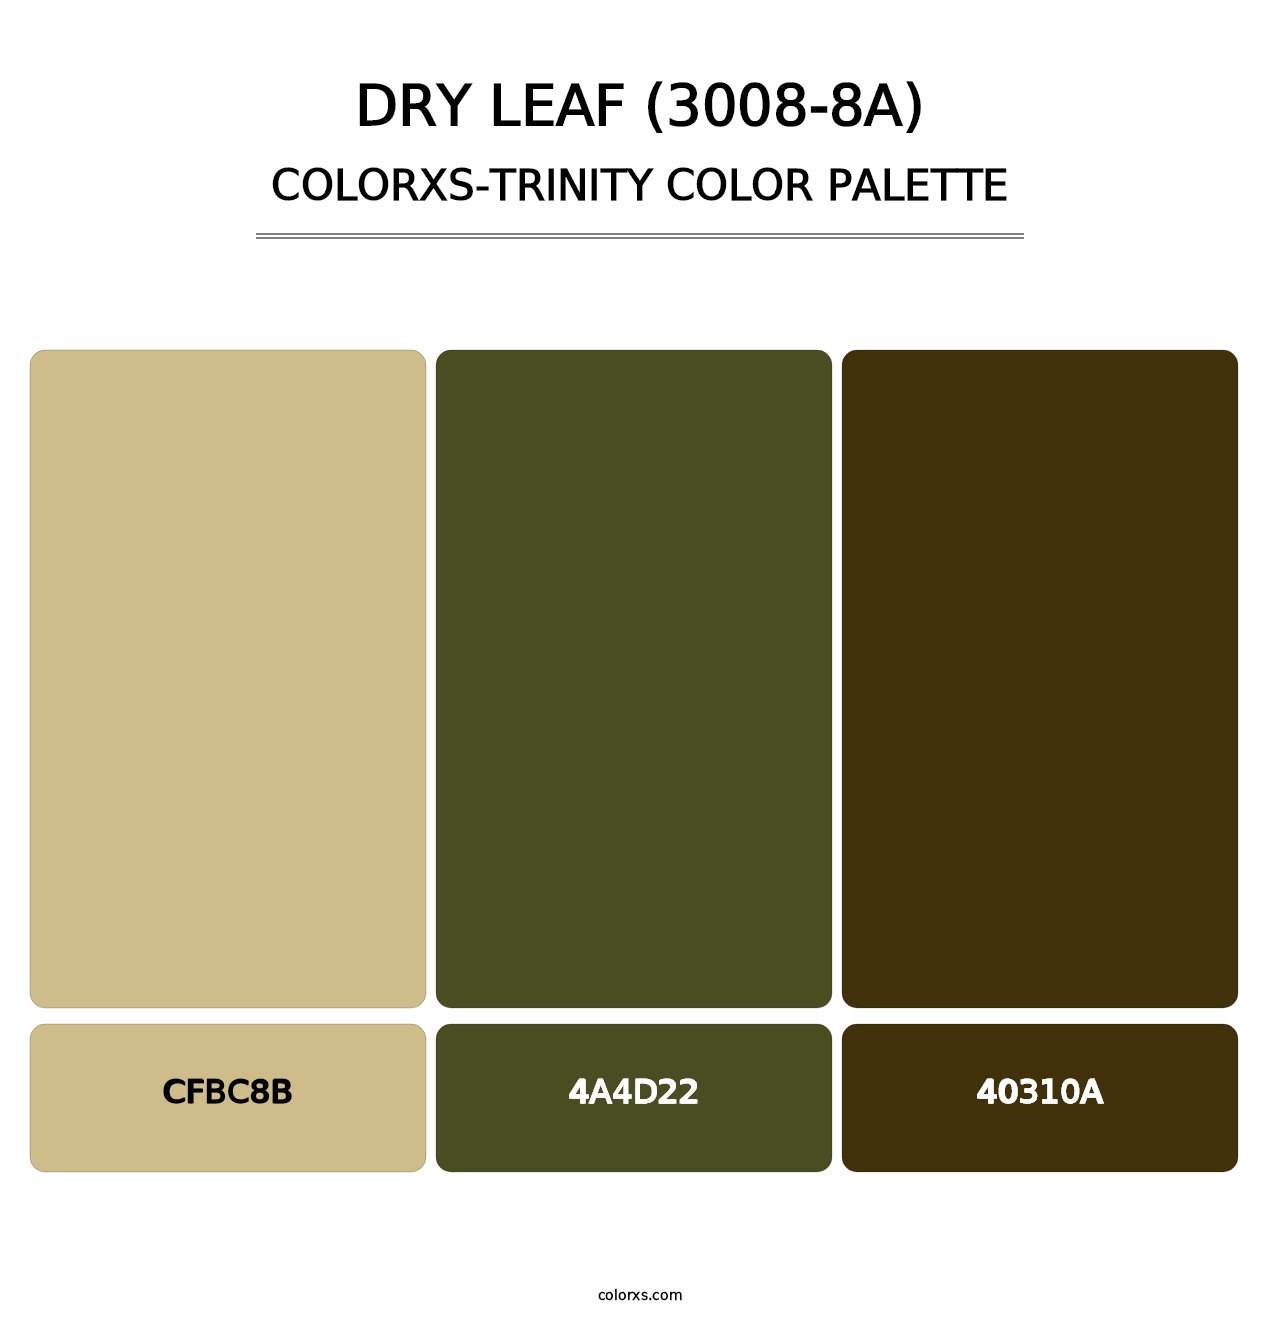 Dry Leaf (3008-8A) - Colorxs Trinity Palette